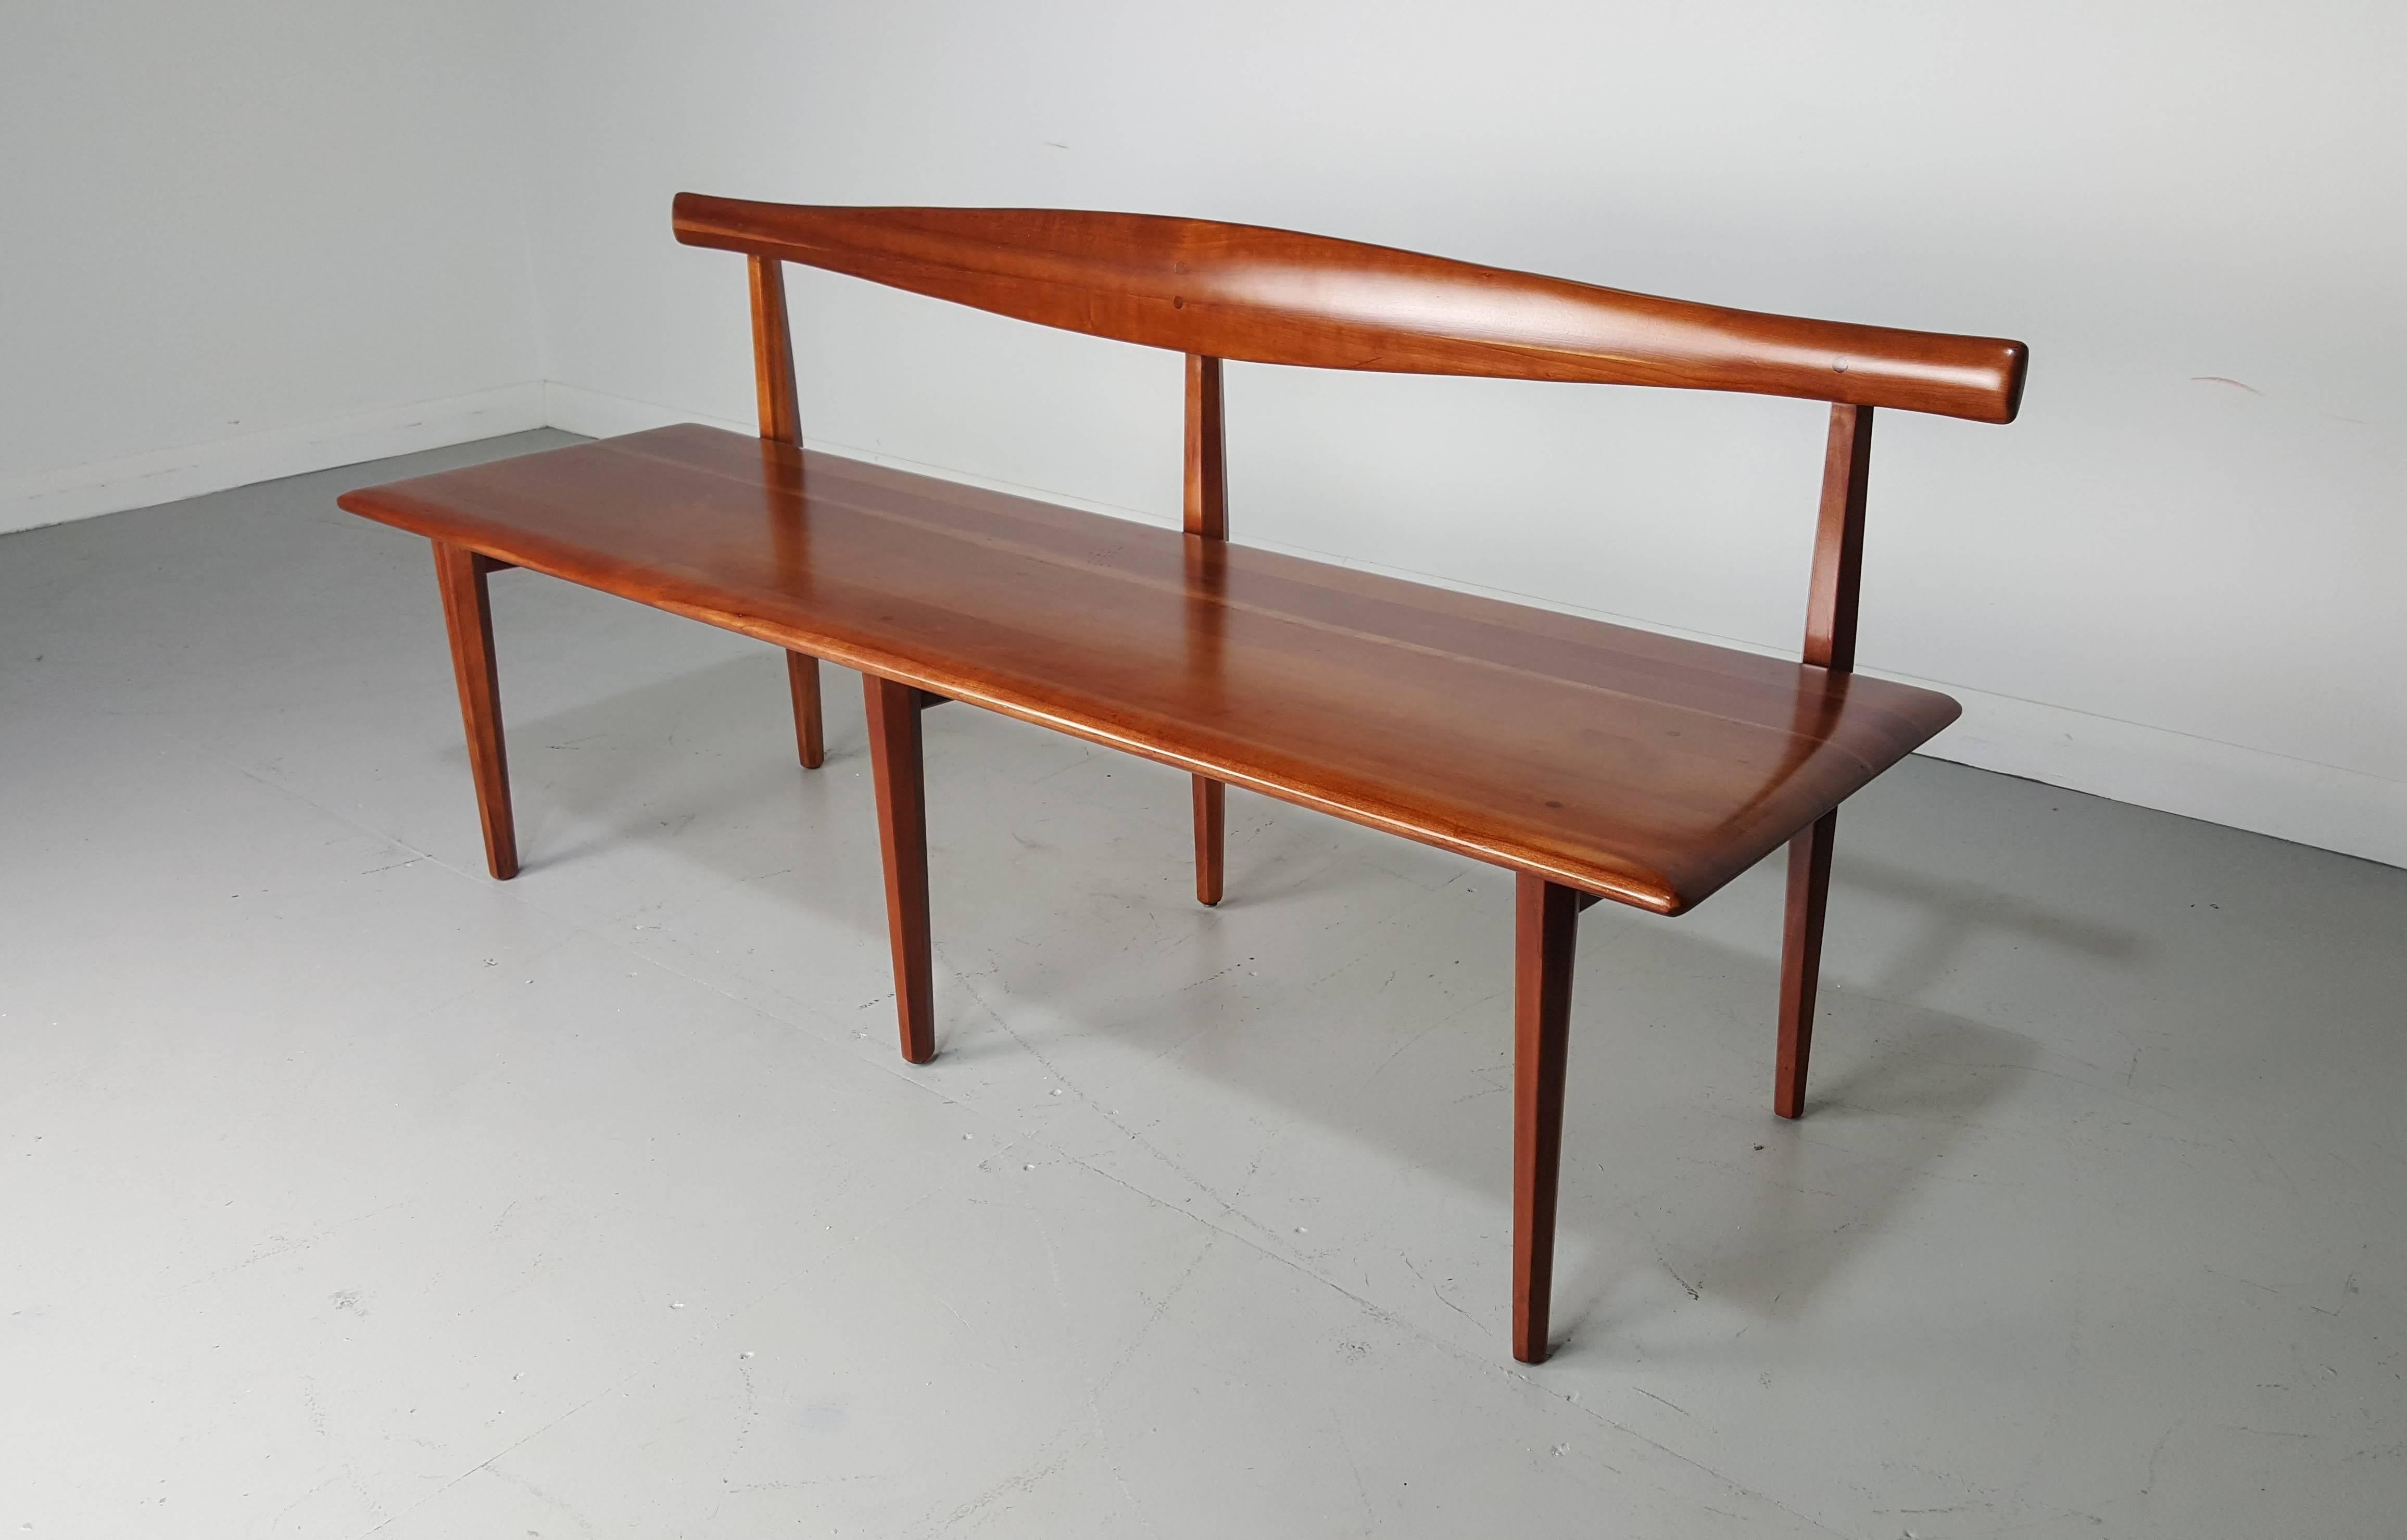 Beautiful long bench by Kipp Stewart & Stewart MacDougall for Winchendon, 1950s. Excellent design and quality. The piece has been fully restored.

We offer free regular deliveries to NYC and Philadelphia area. Delivery to DC, MD, CT and MA are